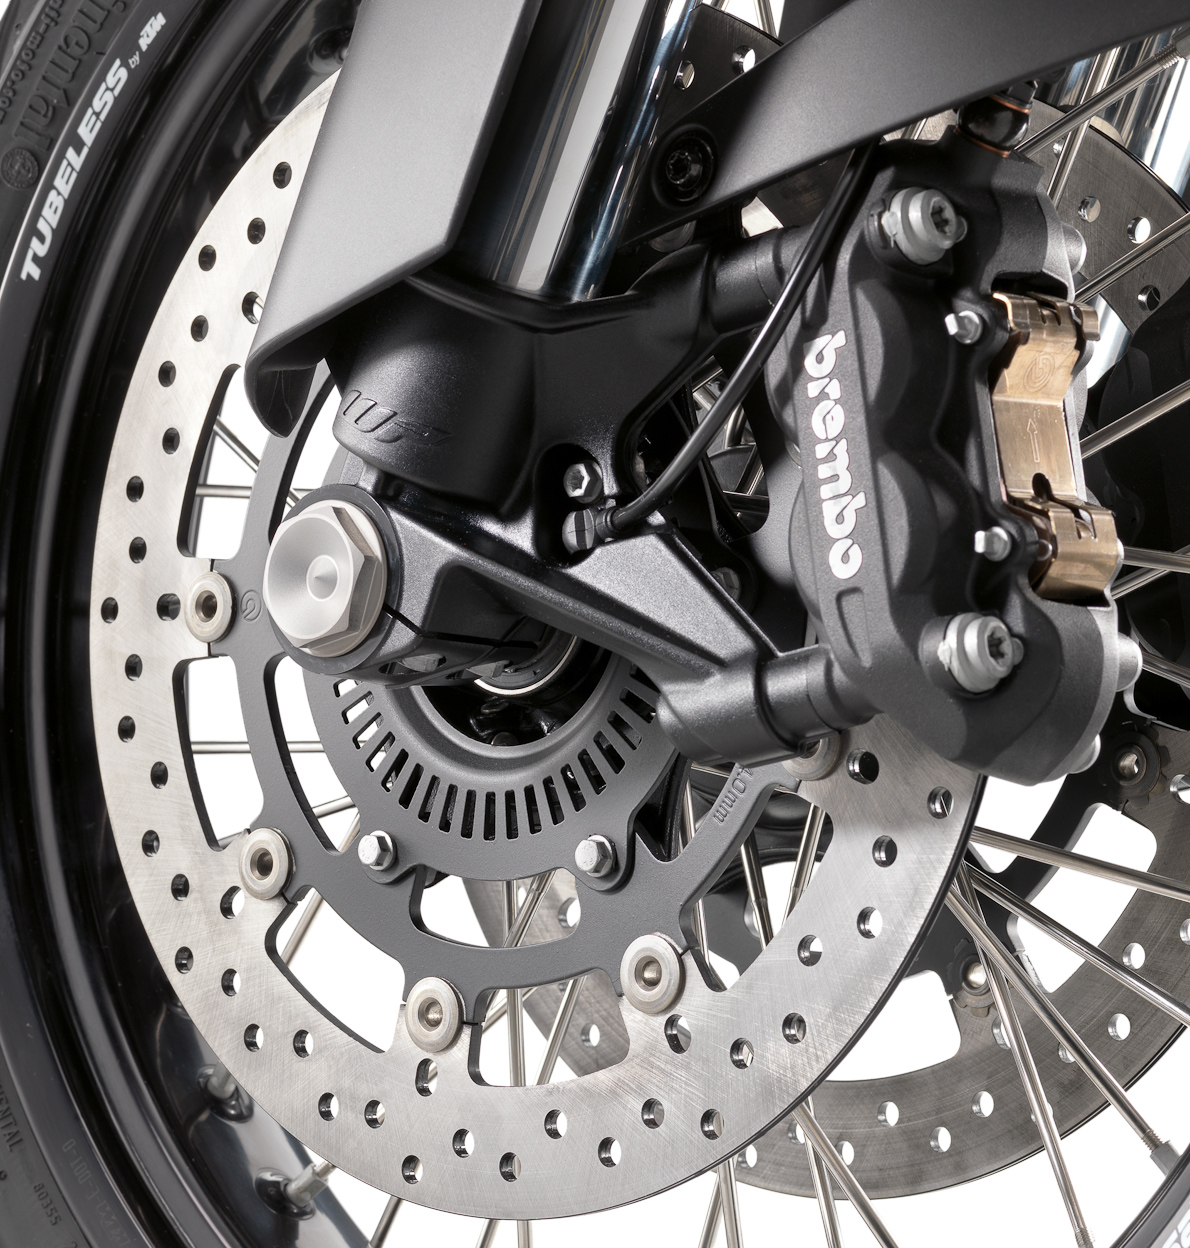 1190ADV ABS front wheel